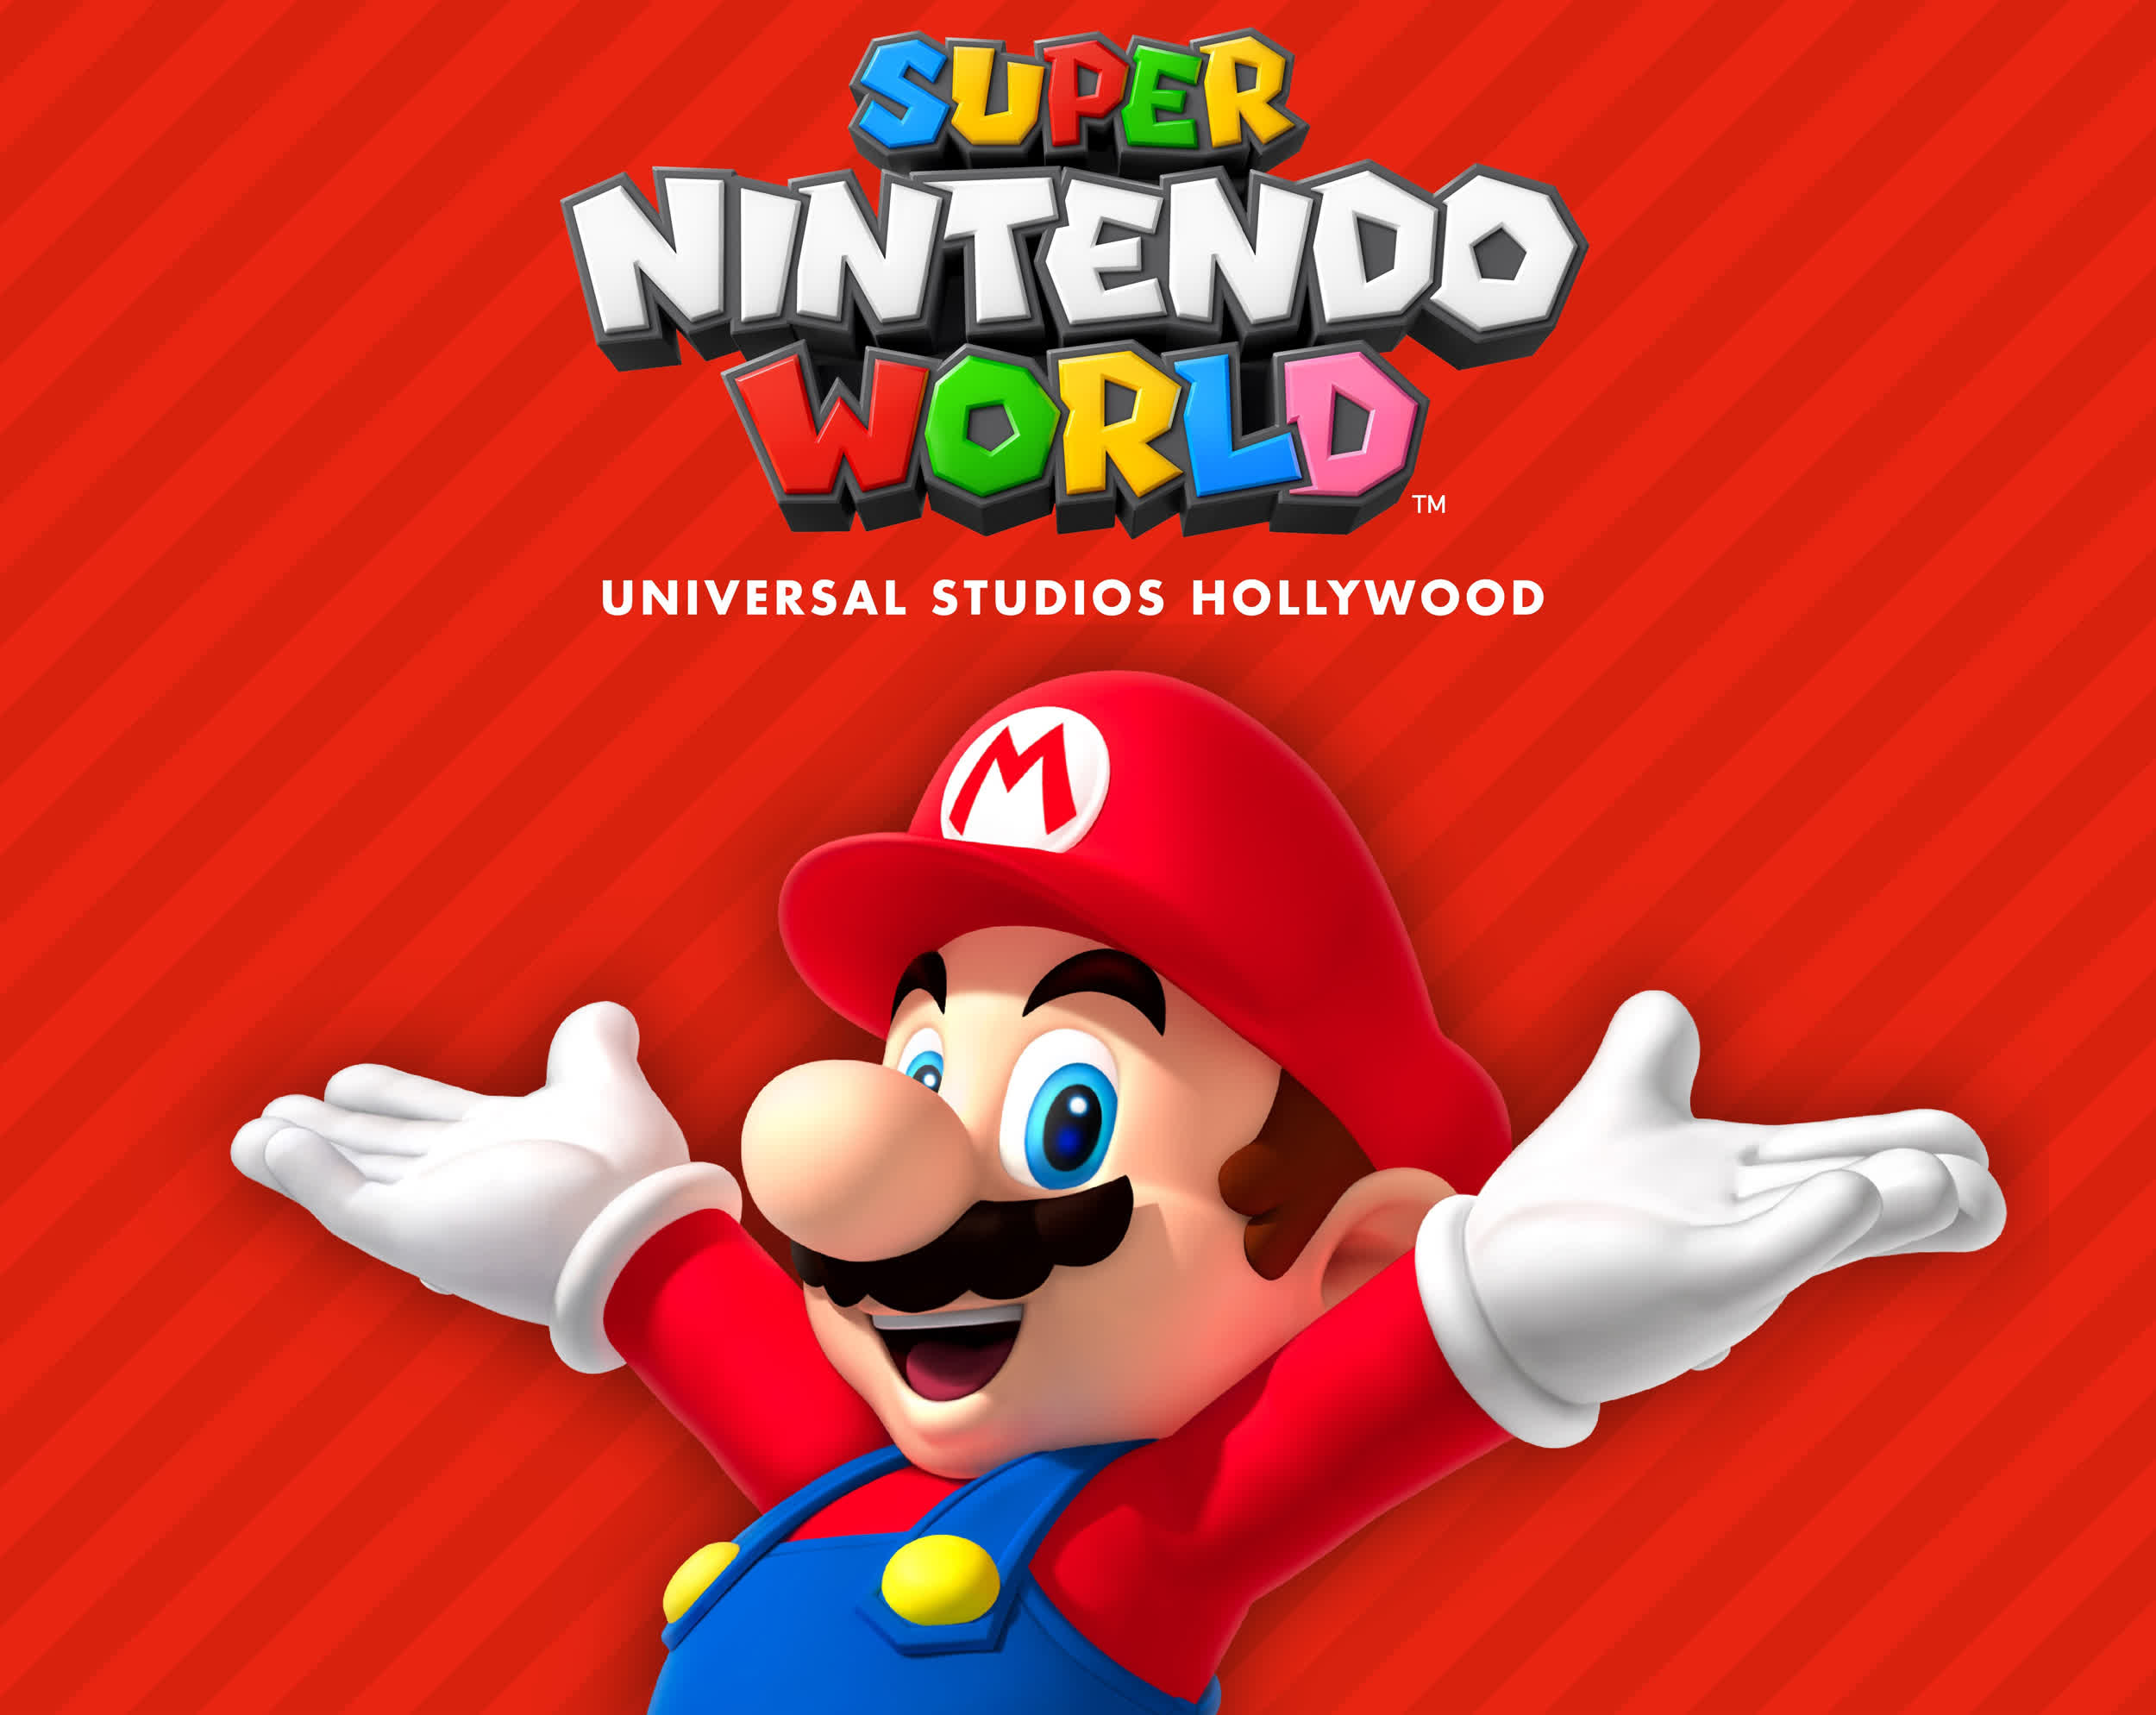 Super Nintendo World will open at Universal Studios Hollywood in 2023